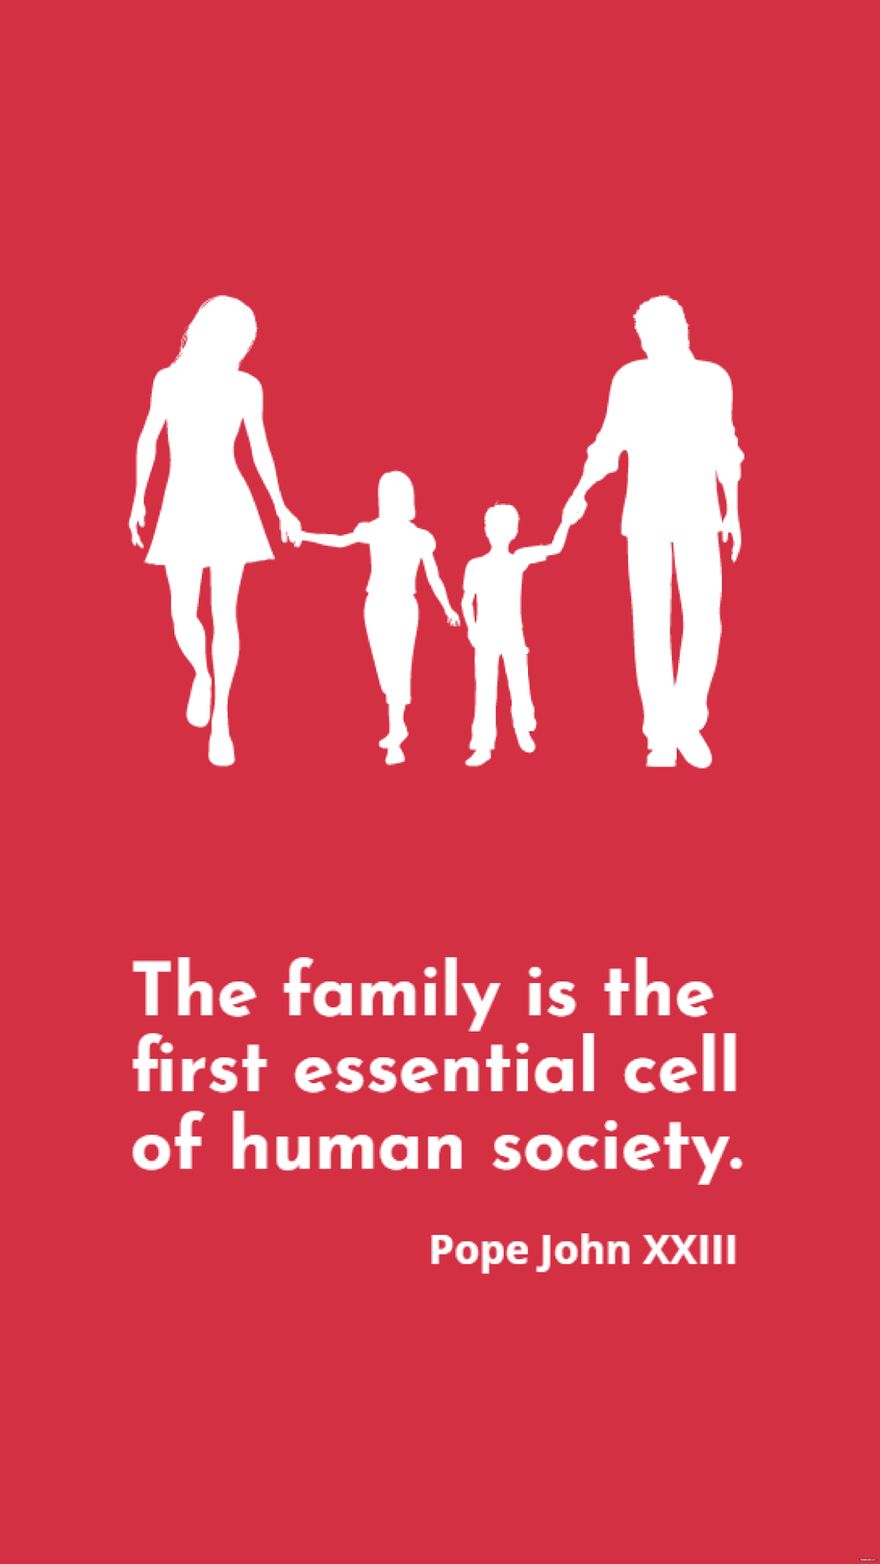 Pope John XXIII - The family is the first essential cell of human society.